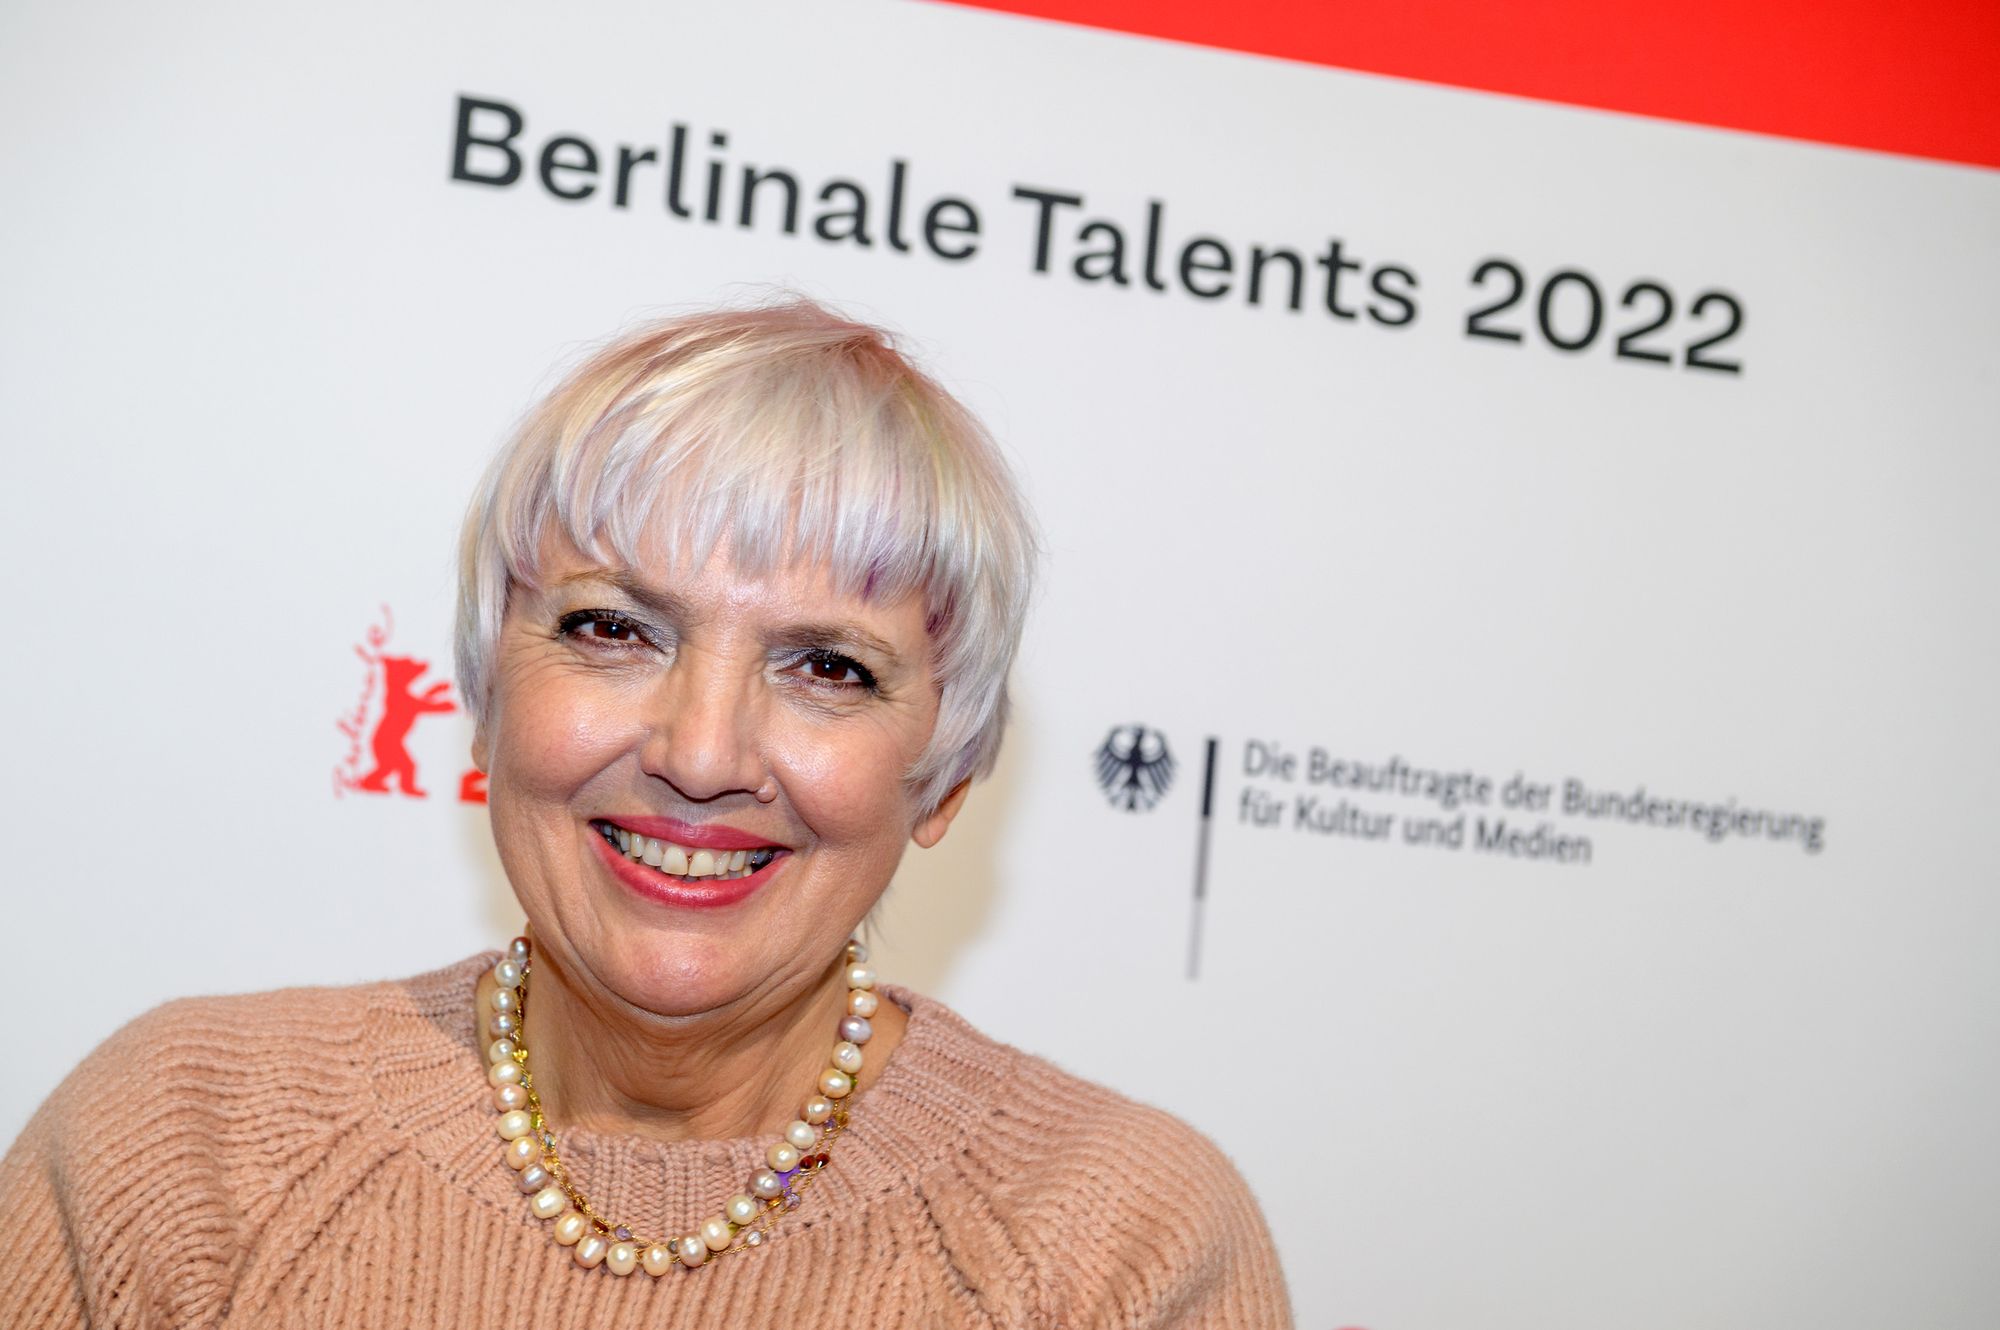 Minister of State for Culture and the Media, Claudia Roth, at the Opening Ceremony of Berlinale Talents.